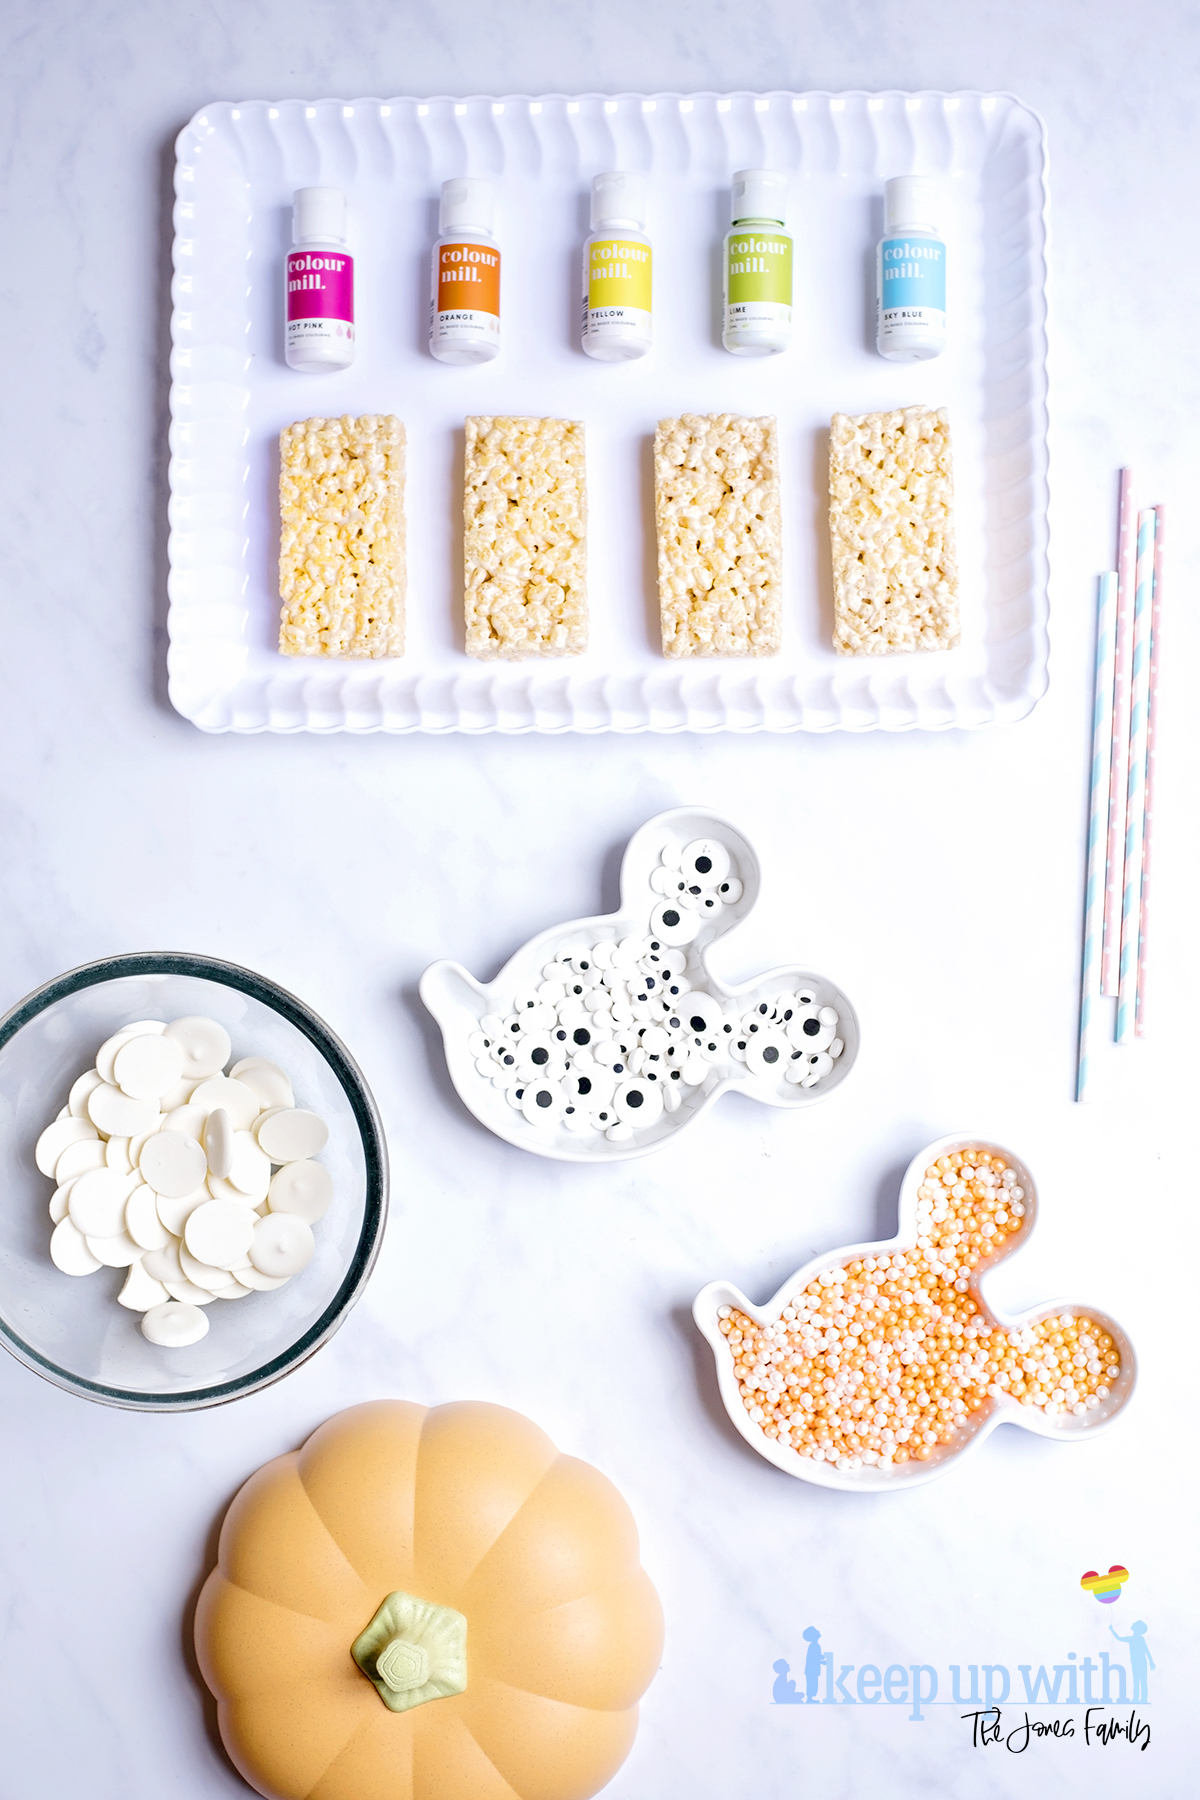 Image shows the ingredients needed to make rice krispie pastel aliens and rice krispie monsters. Image by Sara-Jayne from Keep Up With The Jones Family